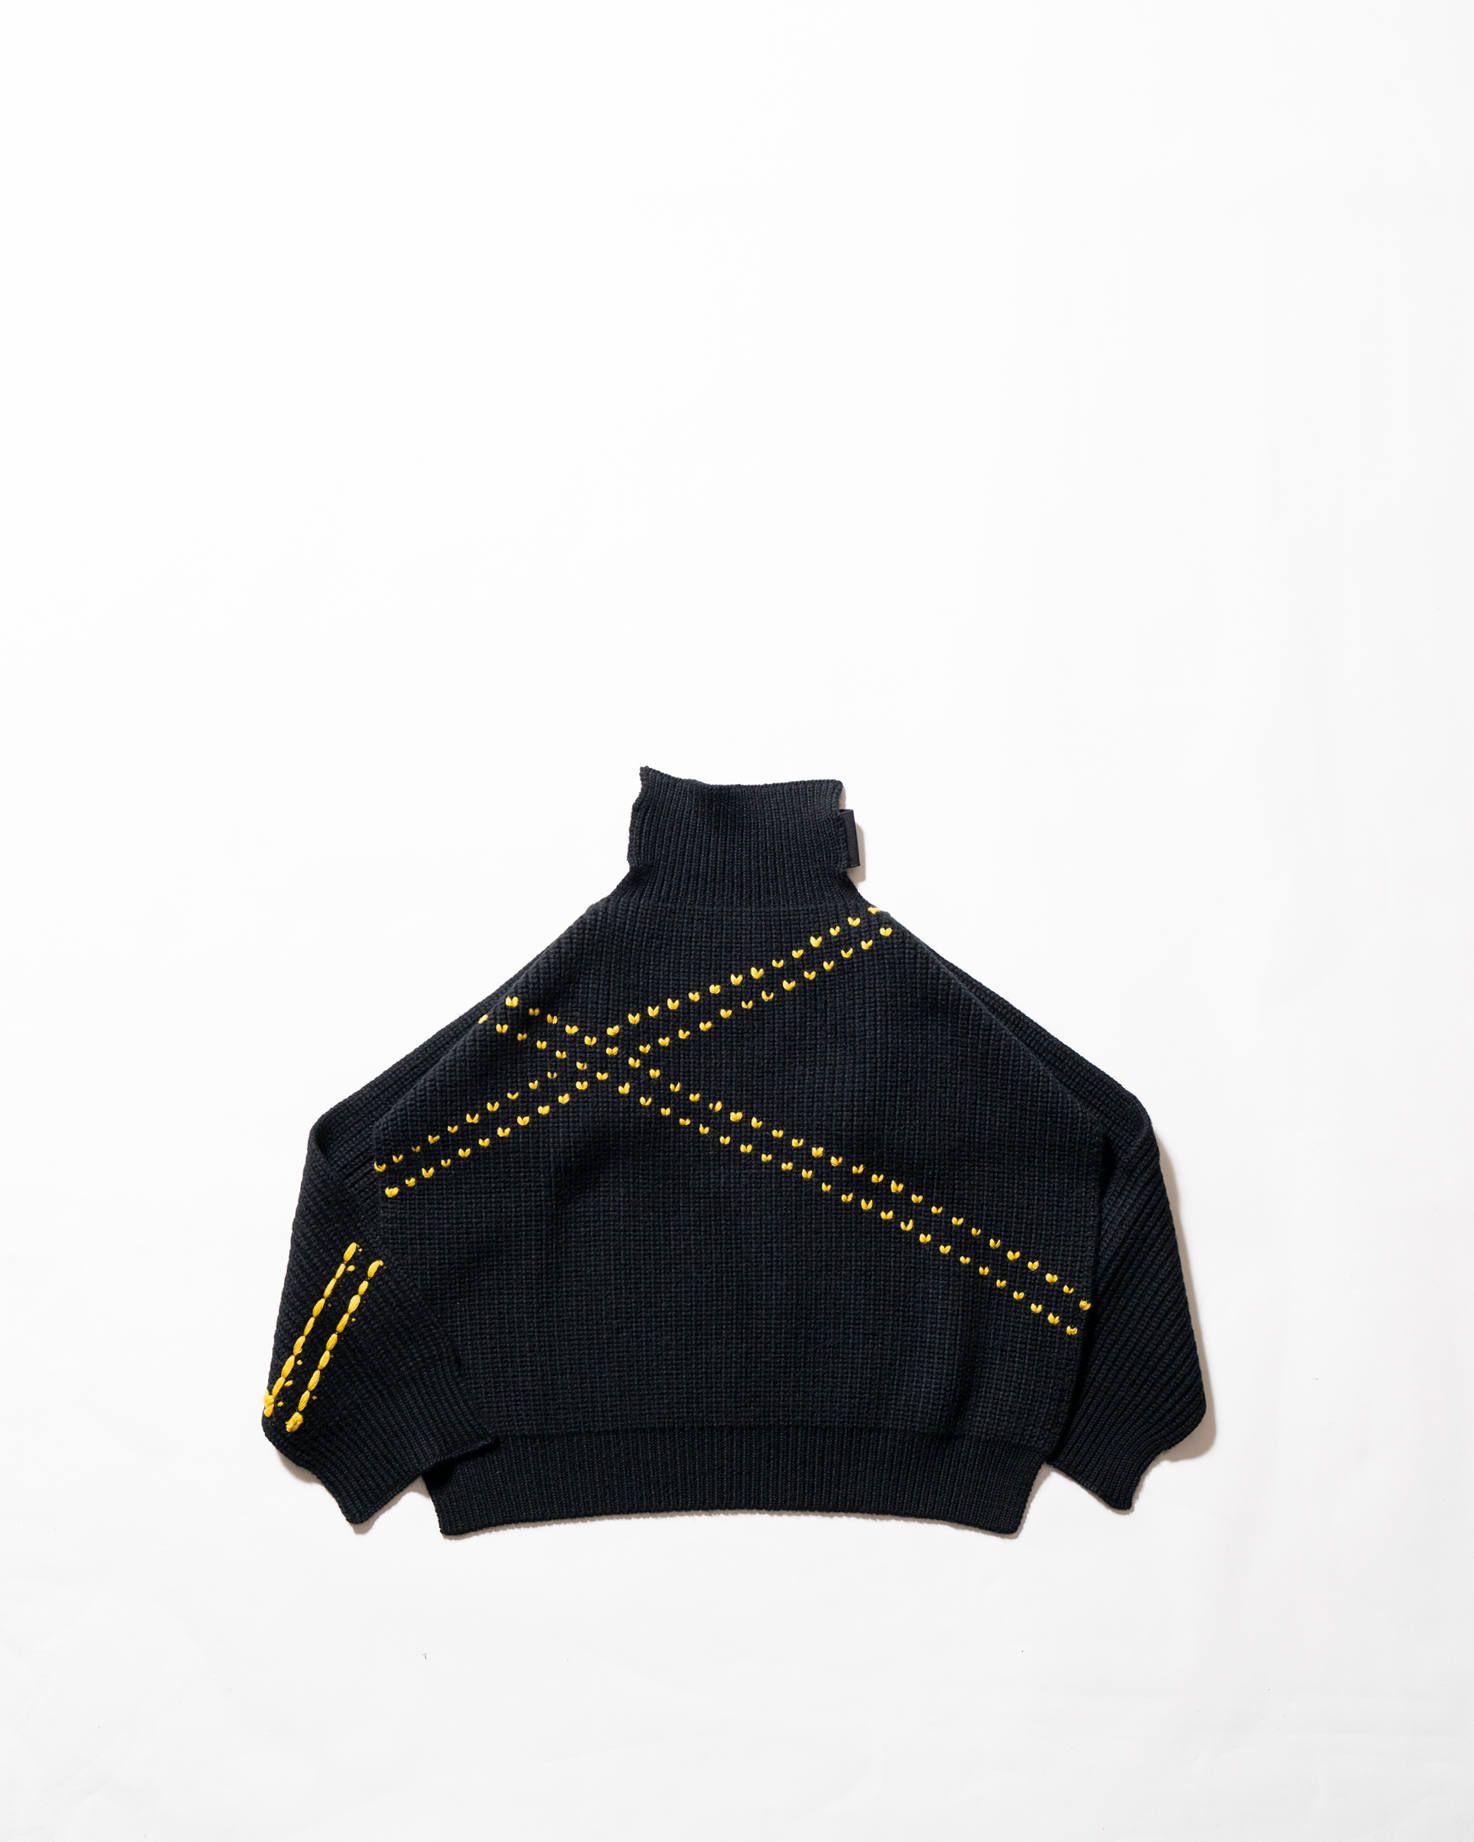 RAF SIMONS - Turtleneck single panel with embroidered jaquard | ALTERFATE